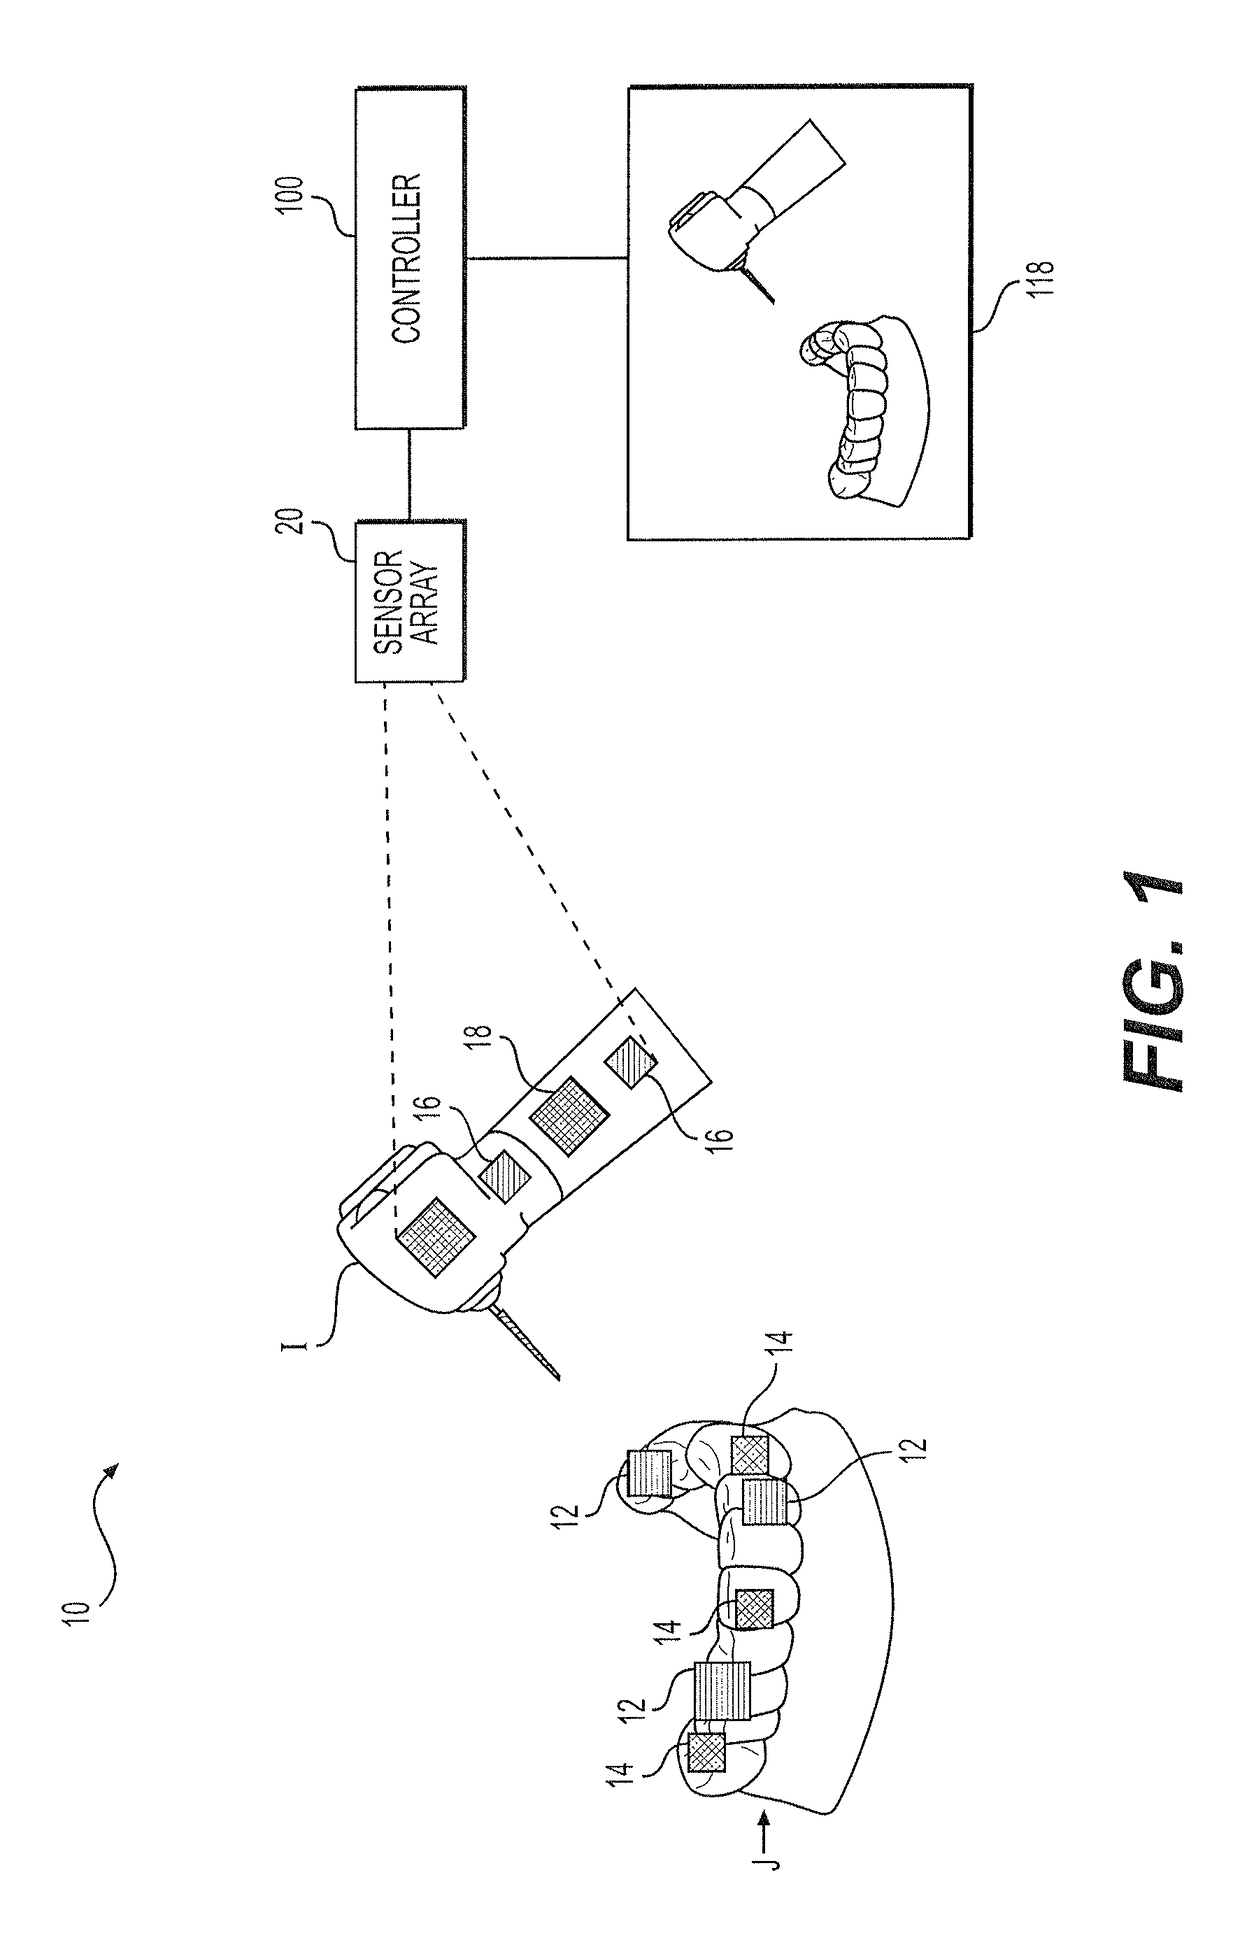 Method of tracking and navigation for a dental instrument